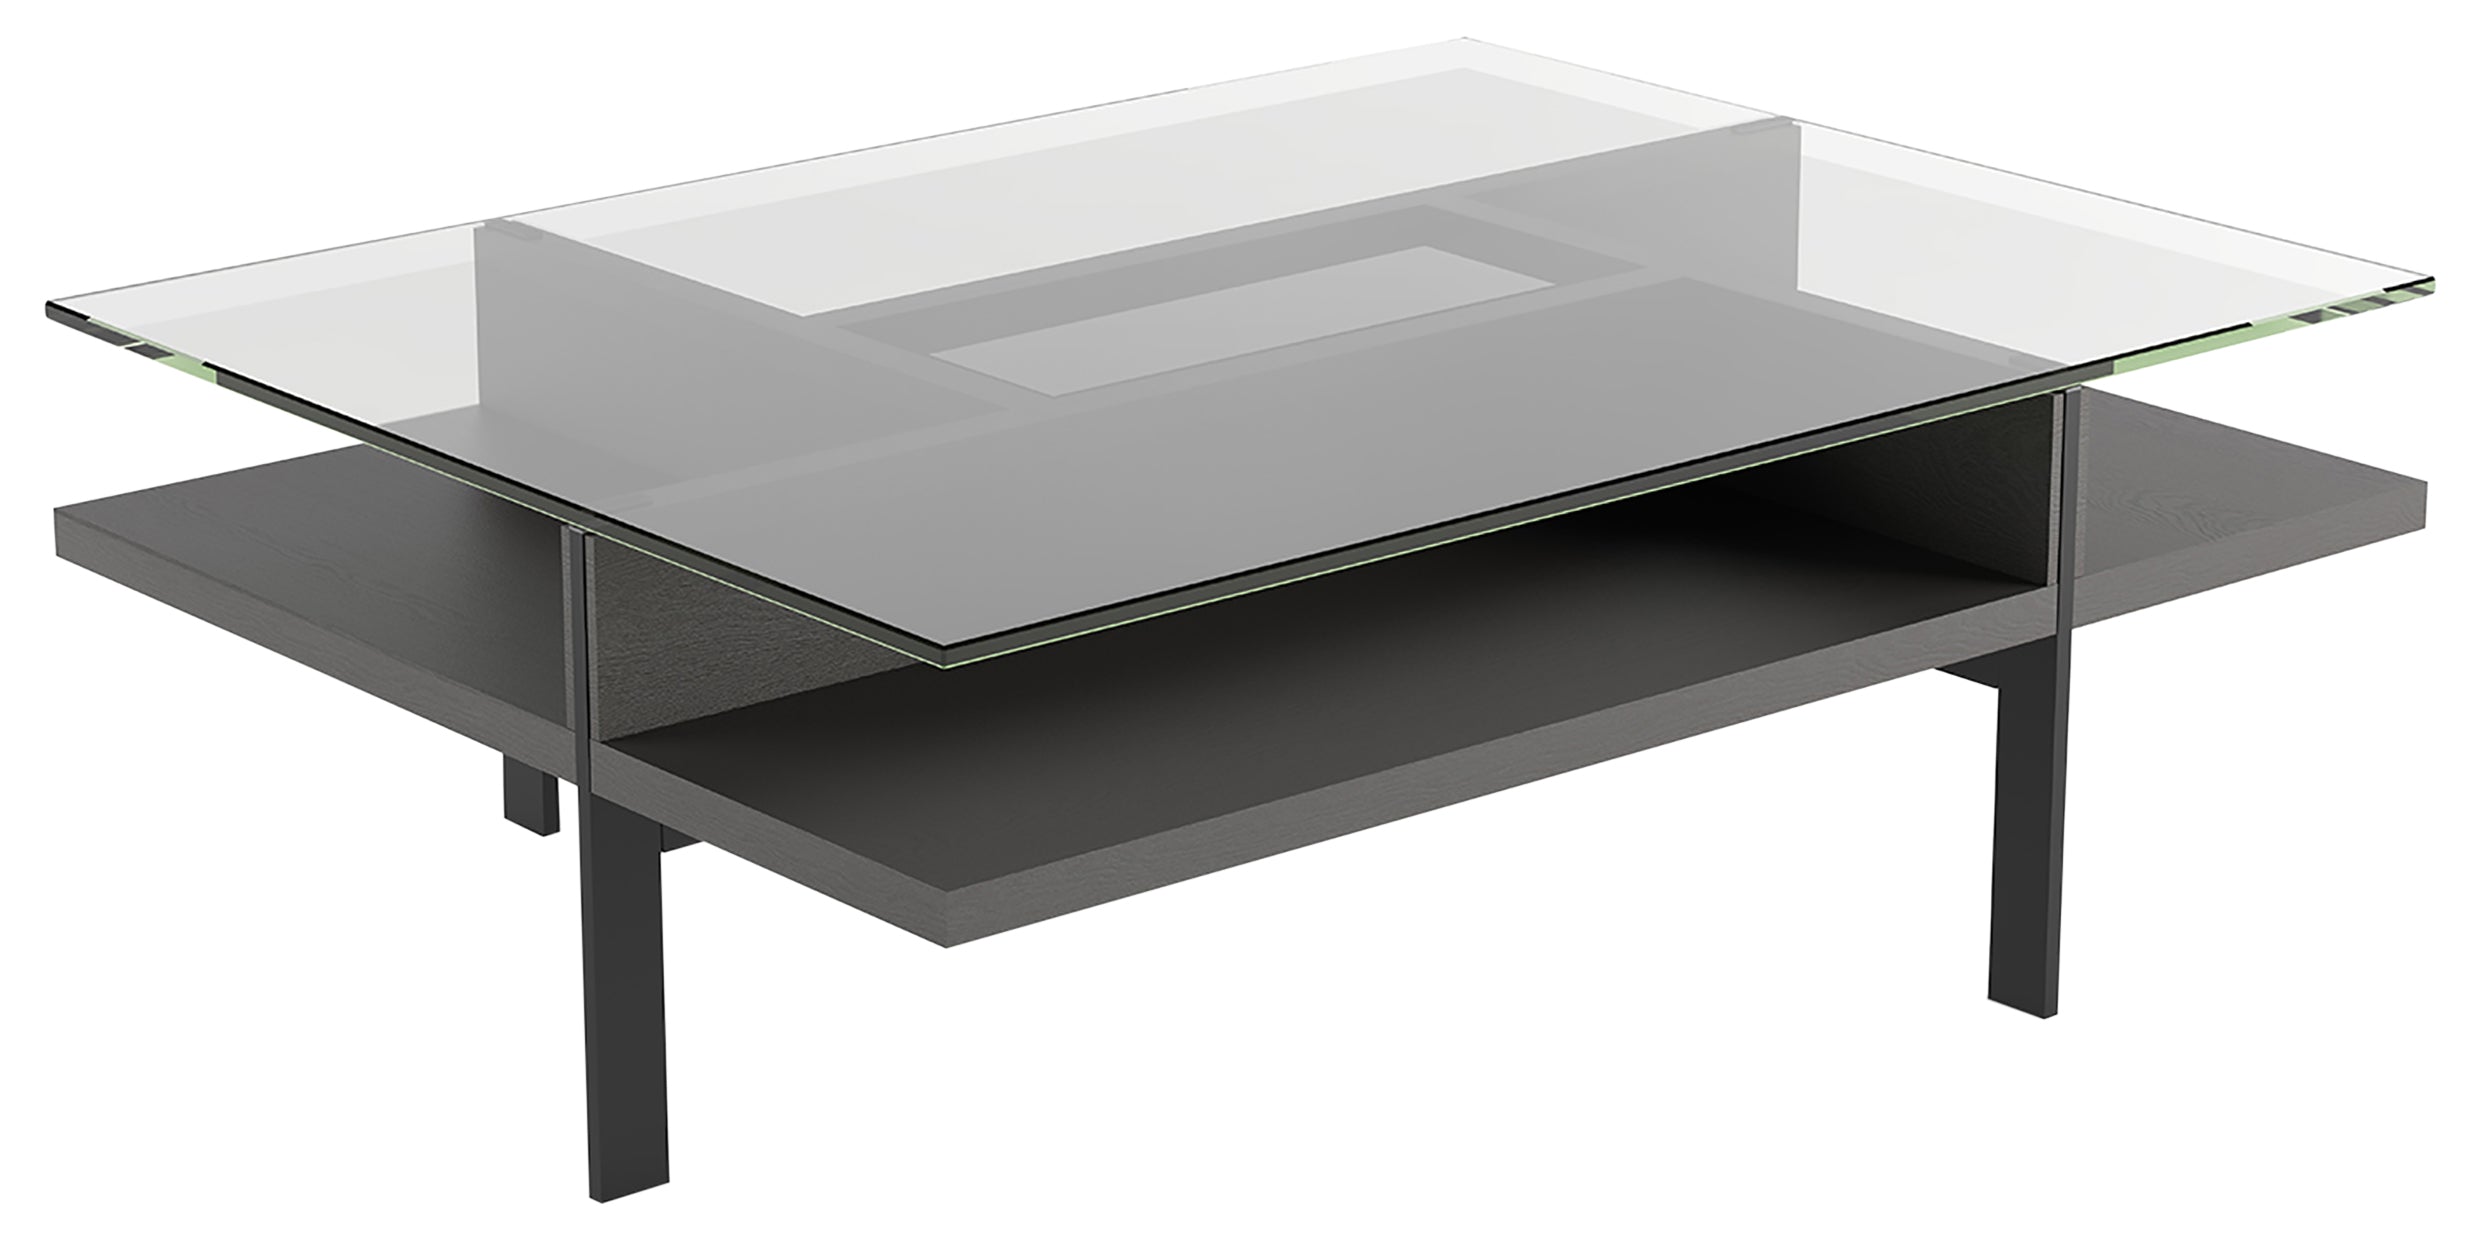 Charcoal Ash Veneer & Polished Tempered Glass with Black Aluminum | BDI Terrace Rectangular Coffee Table | Valley Ridge Furniture